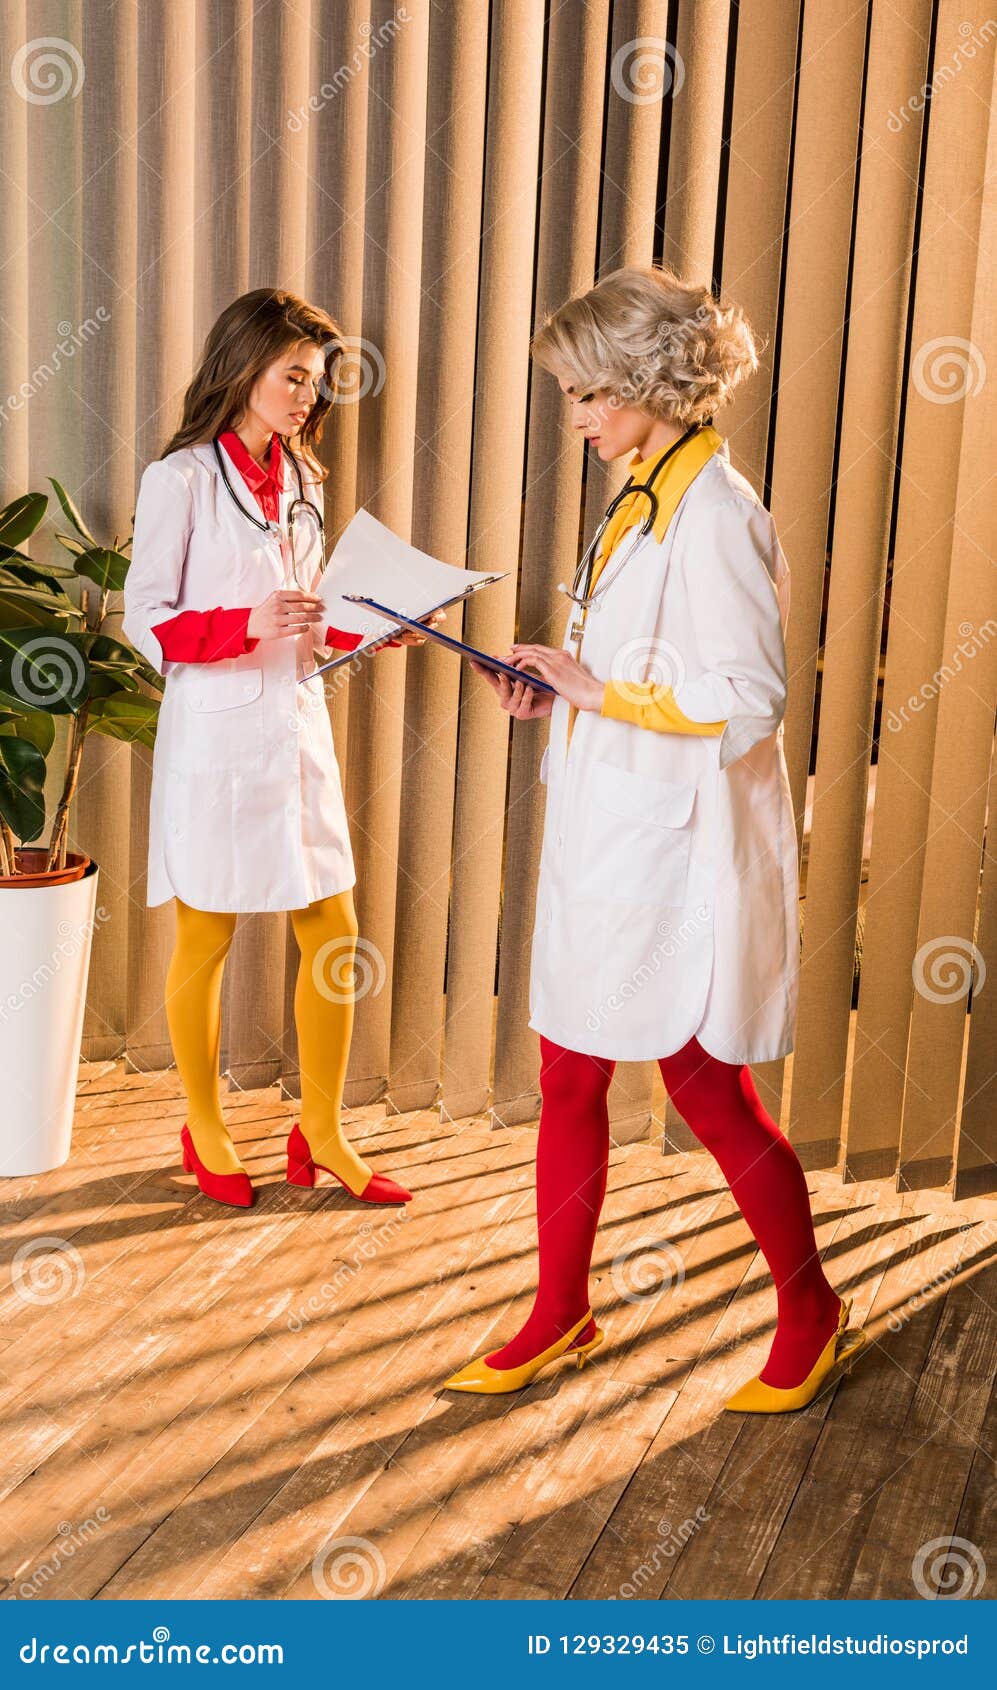 beautiful retro styled doctors looking at clipboards